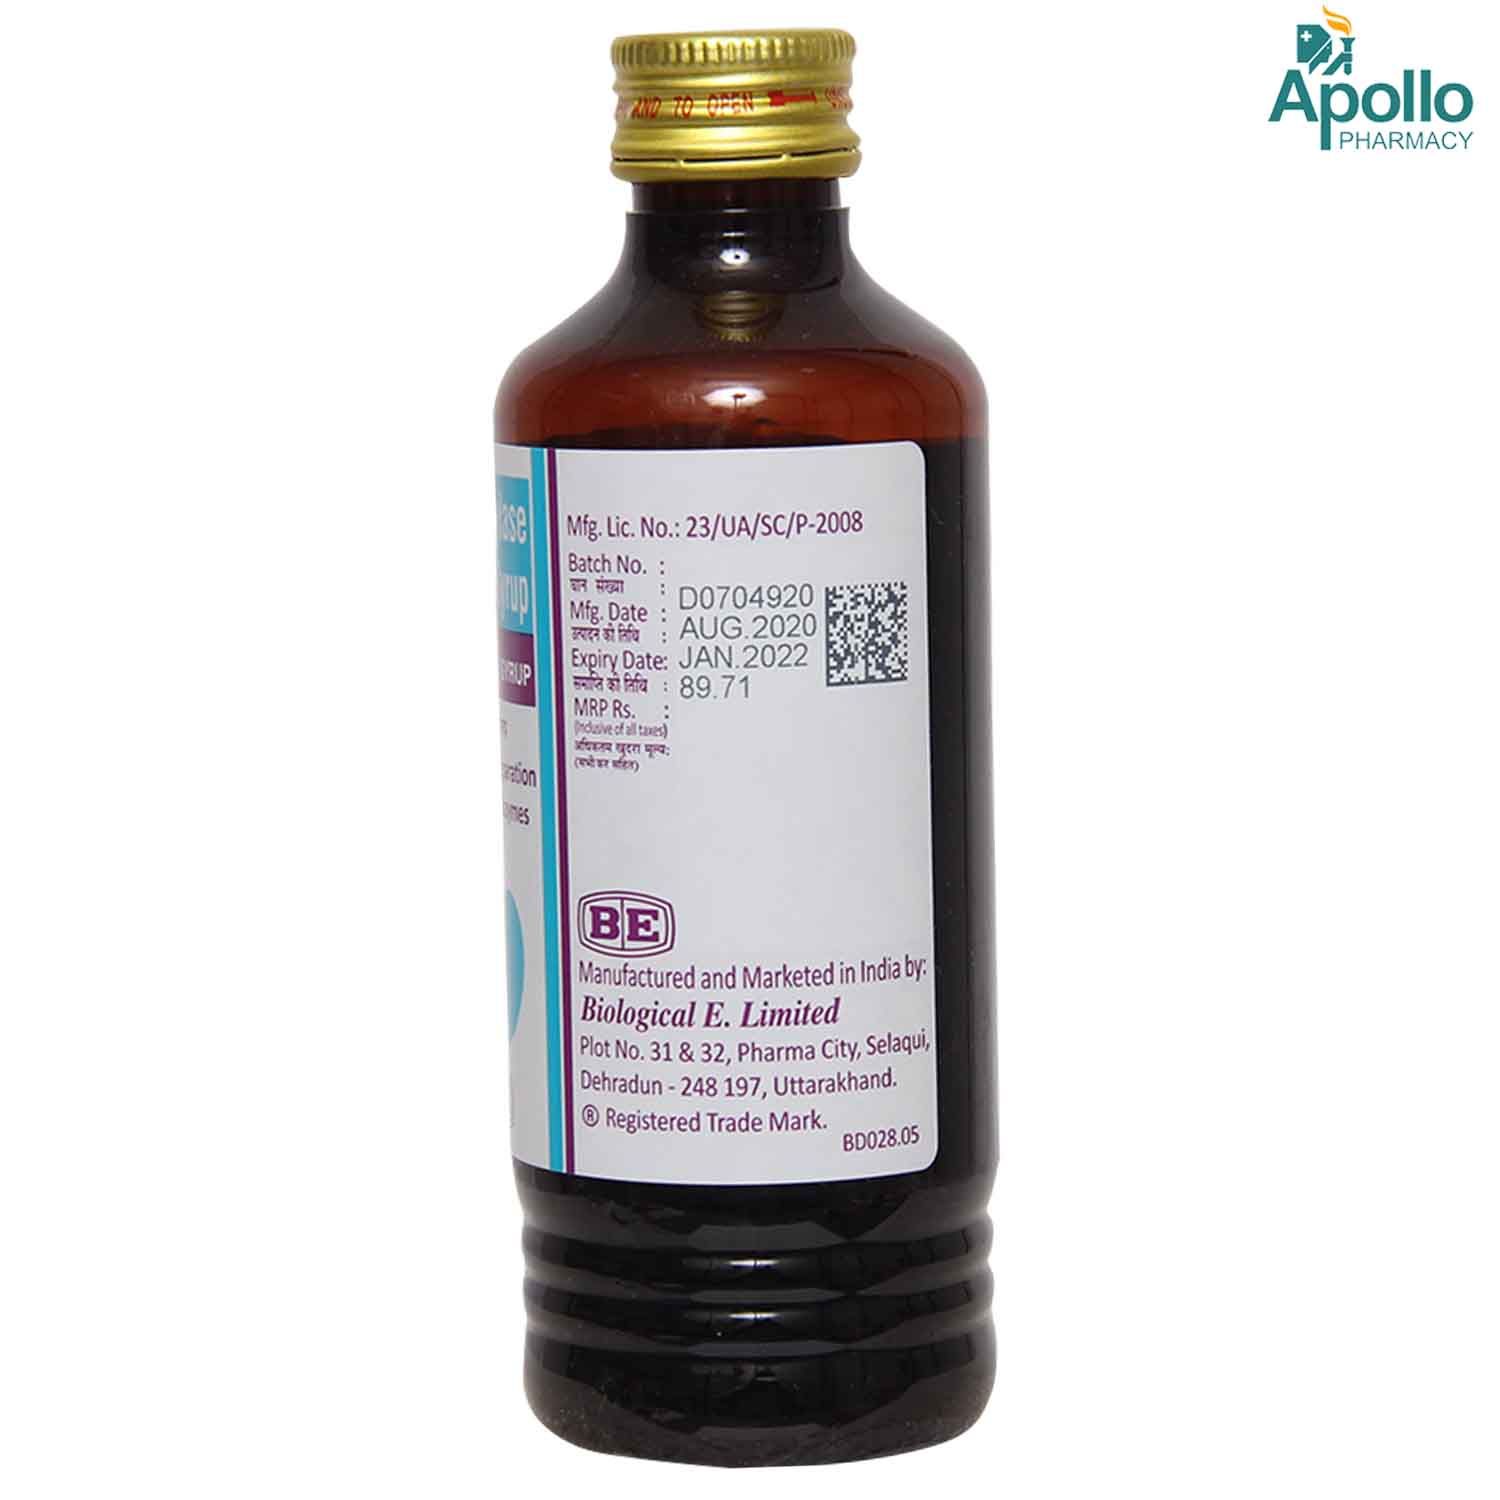 Bestozyme Syrup 200 ml, Pack of 1 SYRUP